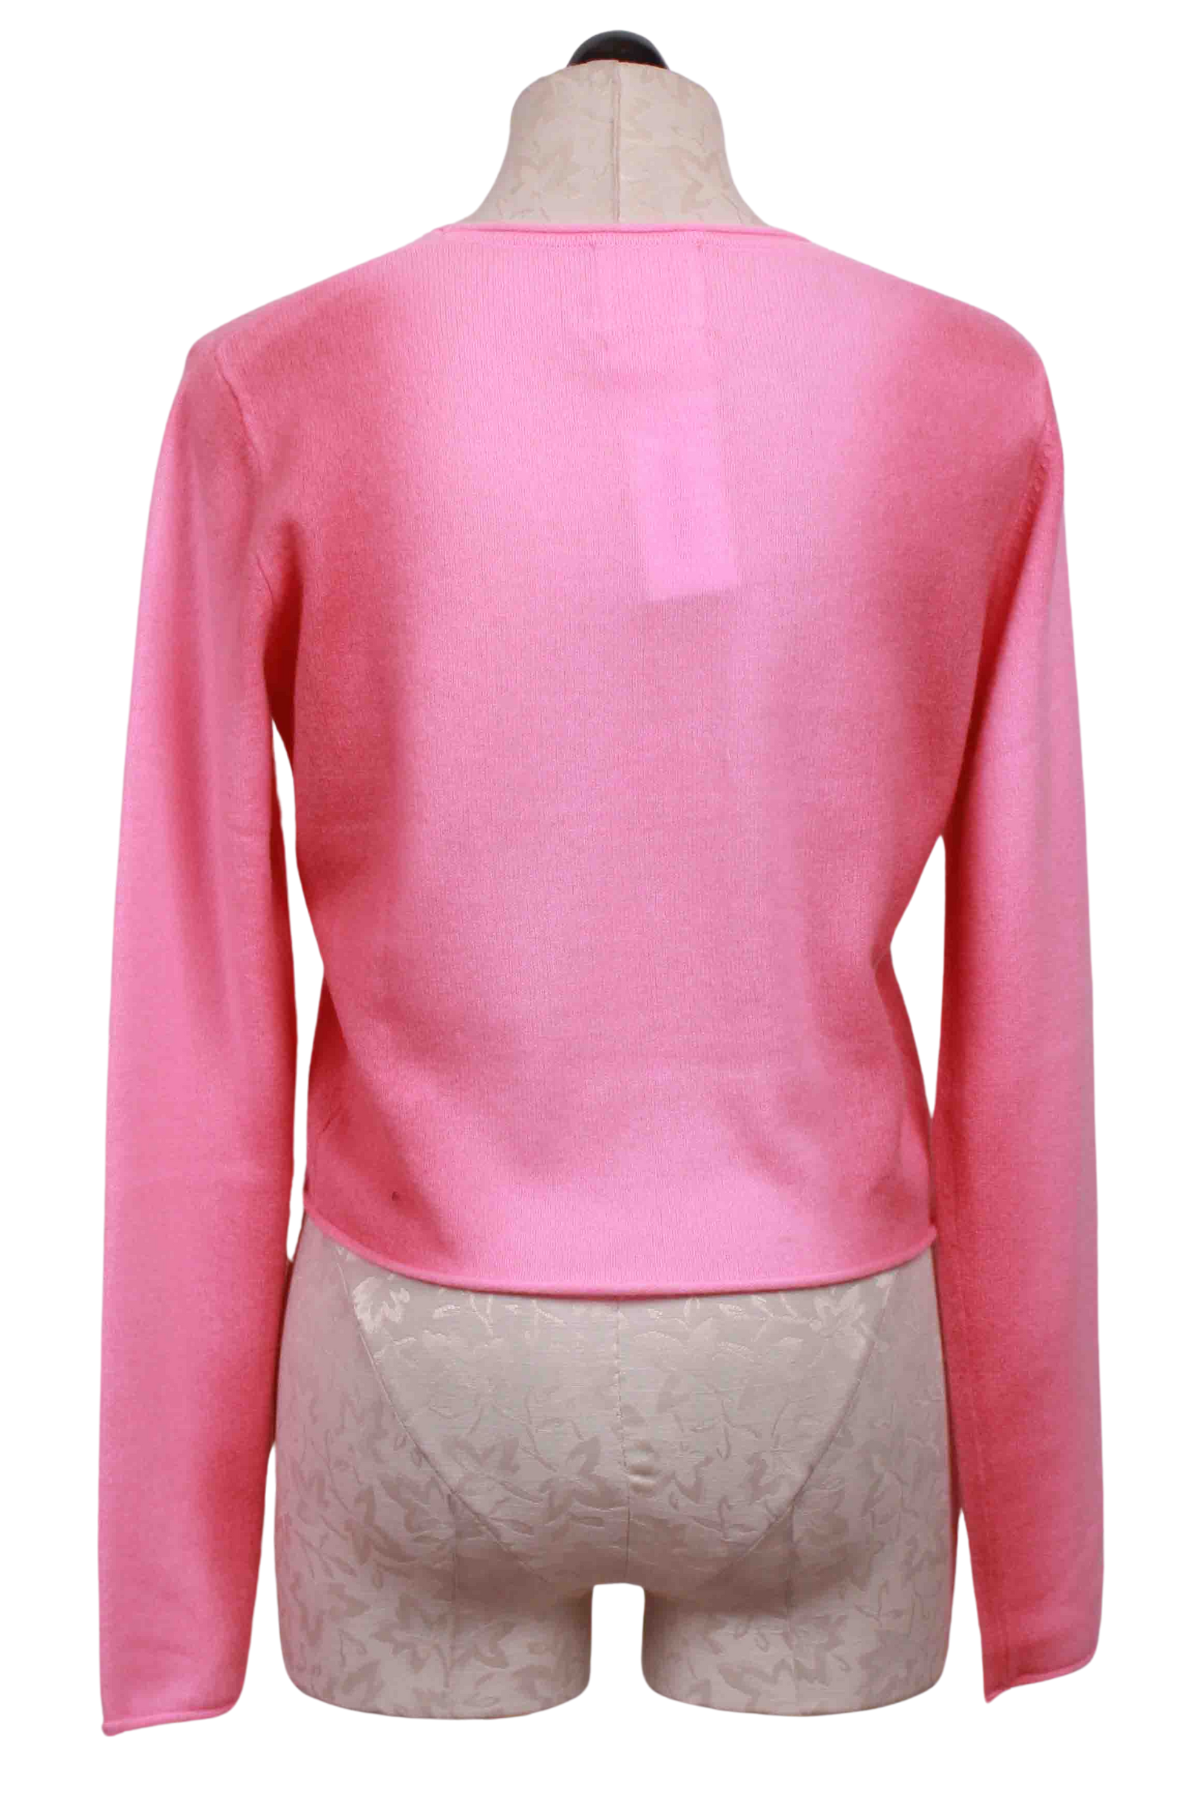 back view of Lollipop and Camellia Rose Hailey Gradient Crew Neck Sweater by Crush